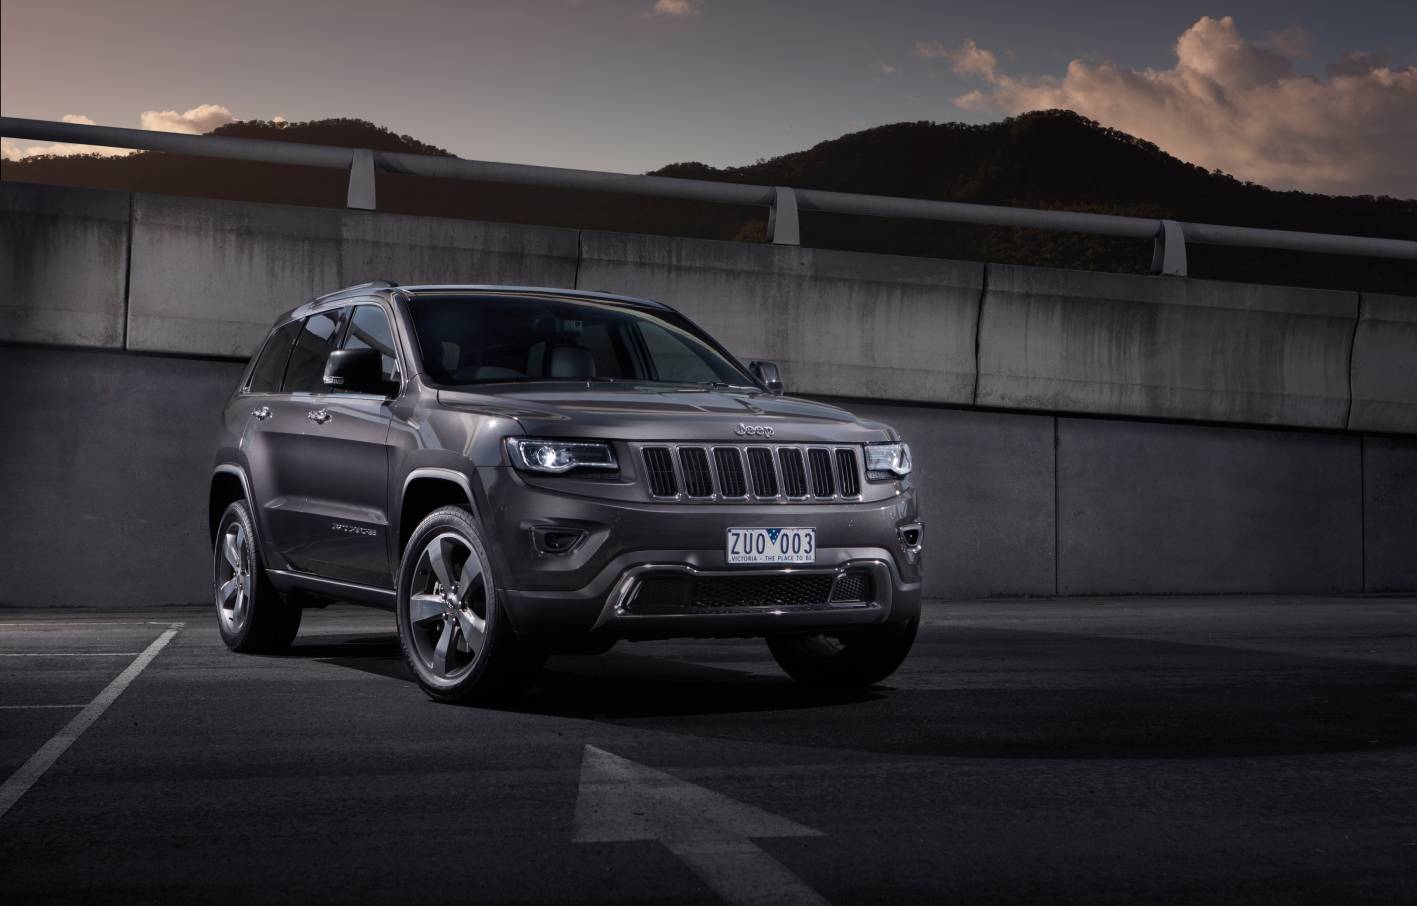 News Jeep Grand Cherokee Is Australia’s Cheapest Large SUV To Own